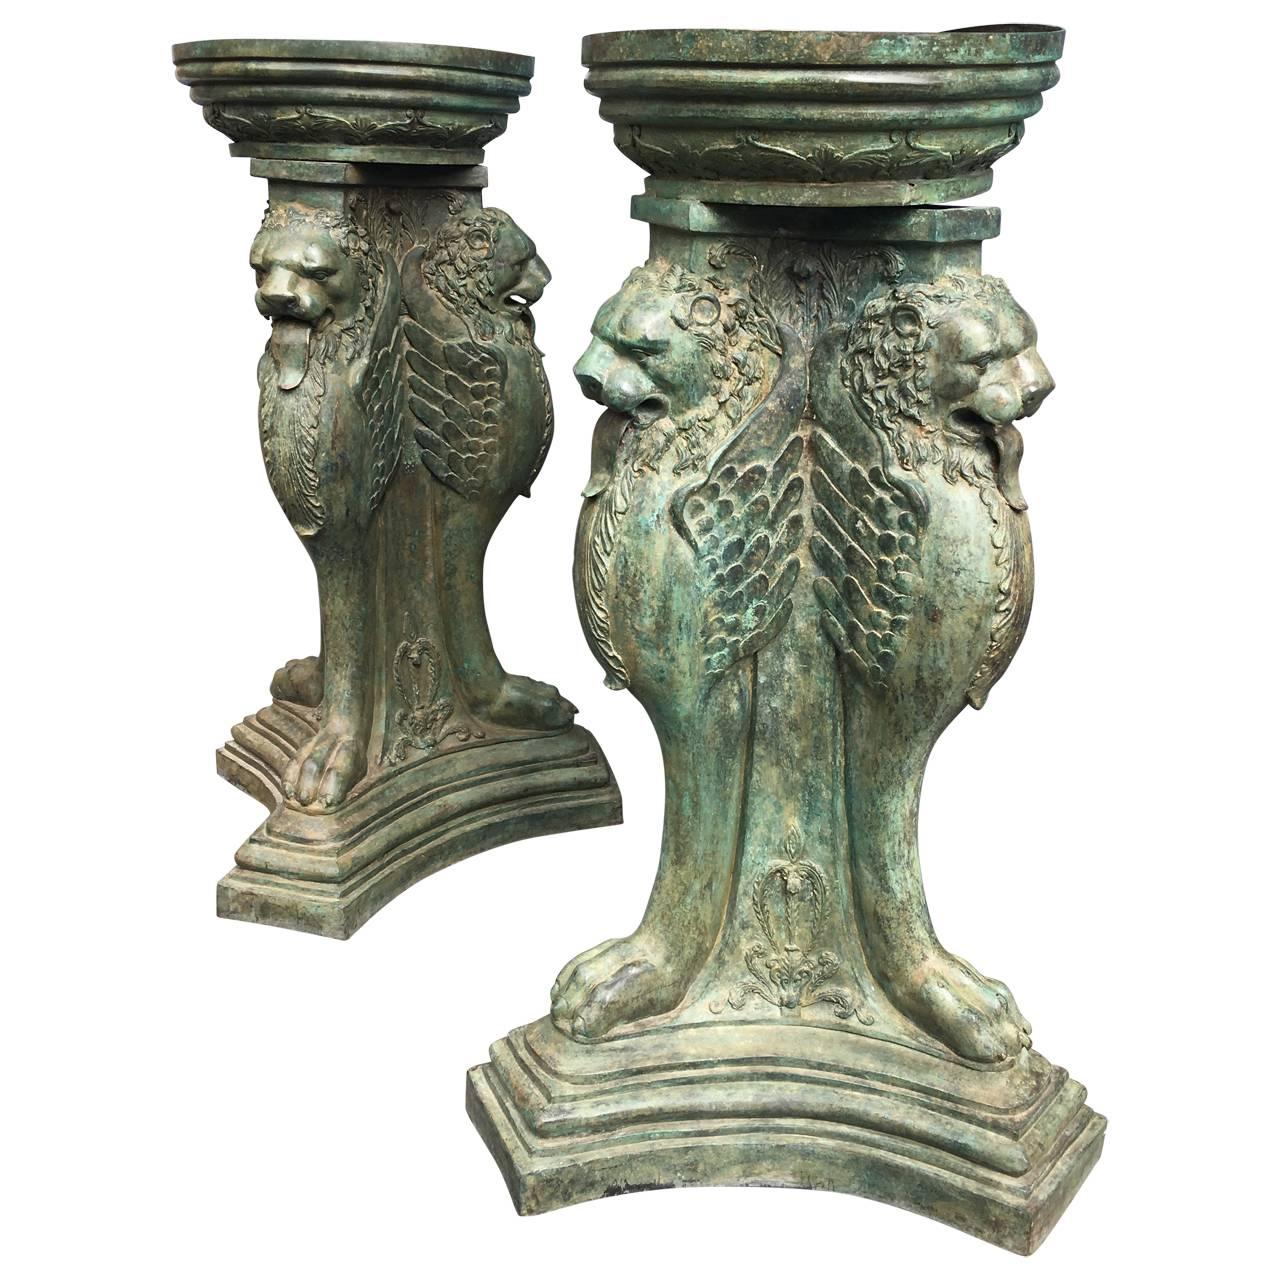 Large pair of urns in the shape of triple-winged griffins and clawed feet.